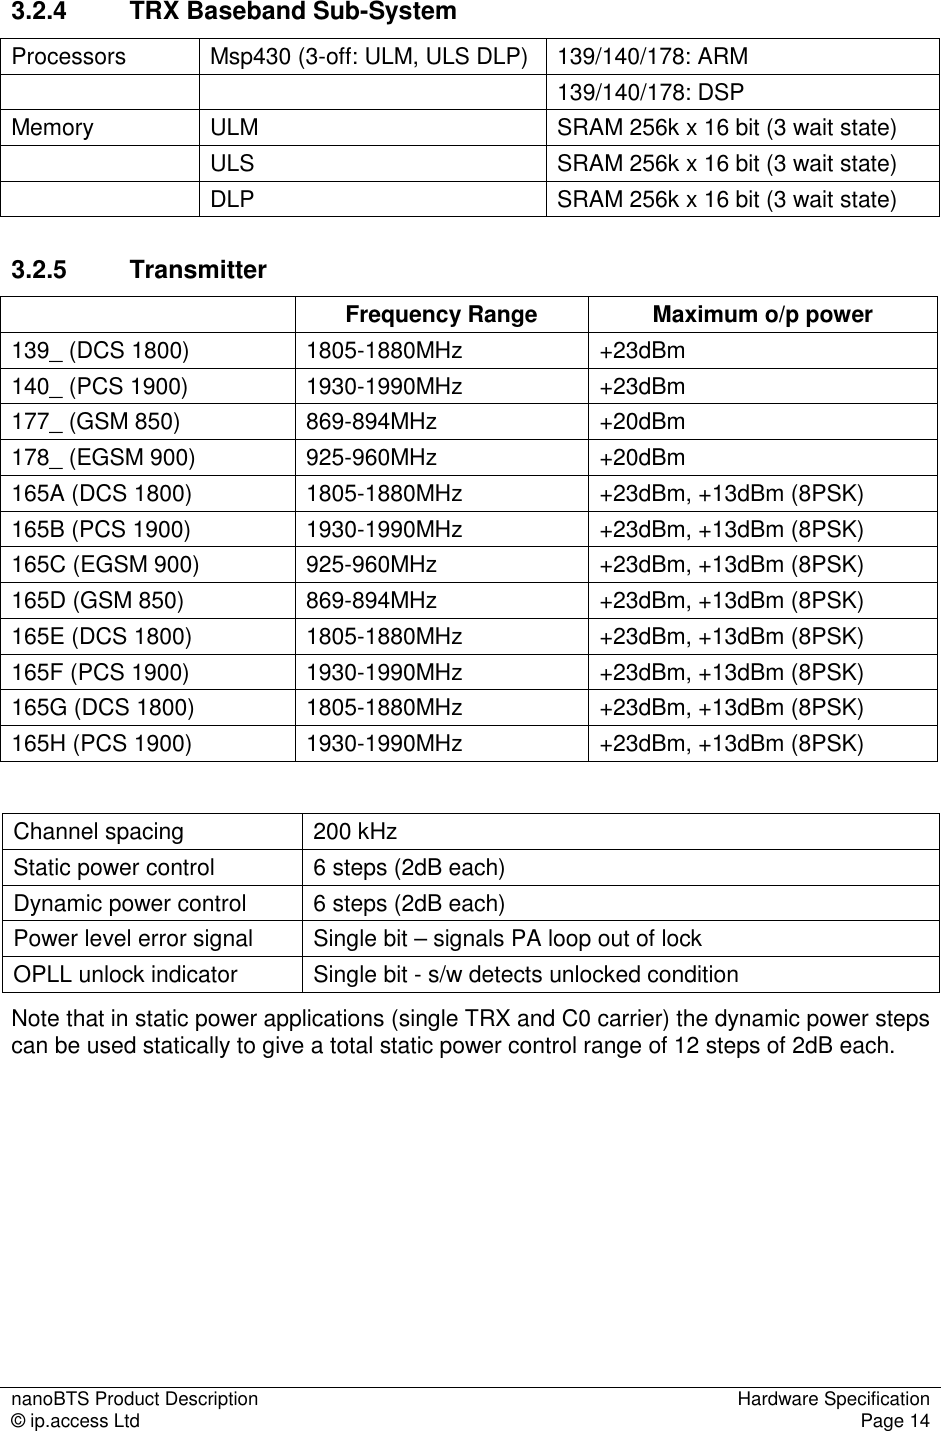 nanoBTS Product Description  Hardware Specification © ip.access Ltd  Page 14  3.2.4  TRX Baseband Sub-System Processors  Msp430 (3-off: ULM, ULS DLP)  139/140/178: ARM      139/140/178: DSP Memory  ULM  SRAM 256k x 16 bit (3 wait state)   ULS  SRAM 256k x 16 bit (3 wait state)   DLP  SRAM 256k x 16 bit (3 wait state) 3.2.5  Transmitter  Frequency Range  Maximum o/p power 139_ (DCS 1800)  1805-1880MHz  +23dBm 140_ (PCS 1900)  1930-1990MHz  +23dBm 177_ (GSM 850)  869-894MHz  +20dBm 178_ (EGSM 900)  925-960MHz  +20dBm 165A (DCS 1800)  1805-1880MHz  +23dBm, +13dBm (8PSK) 165B (PCS 1900)  1930-1990MHz  +23dBm, +13dBm (8PSK) 165C (EGSM 900)  925-960MHz  +23dBm, +13dBm (8PSK) 165D (GSM 850)  869-894MHz  +23dBm, +13dBm (8PSK) 165E (DCS 1800)  1805-1880MHz  +23dBm, +13dBm (8PSK) 165F (PCS 1900)  1930-1990MHz  +23dBm, +13dBm (8PSK) 165G (DCS 1800)  1805-1880MHz  +23dBm, +13dBm (8PSK) 165H (PCS 1900)  1930-1990MHz  +23dBm, +13dBm (8PSK)  Channel spacing  200 kHz Static power control  6 steps (2dB each) Dynamic power control  6 steps (2dB each) Power level error signal  Single bit – signals PA loop out of lock OPLL unlock indicator  Single bit - s/w detects unlocked condition Note that in static power applications (single TRX and C0 carrier) the dynamic power steps can be used statically to give a total static power control range of 12 steps of 2dB each. 